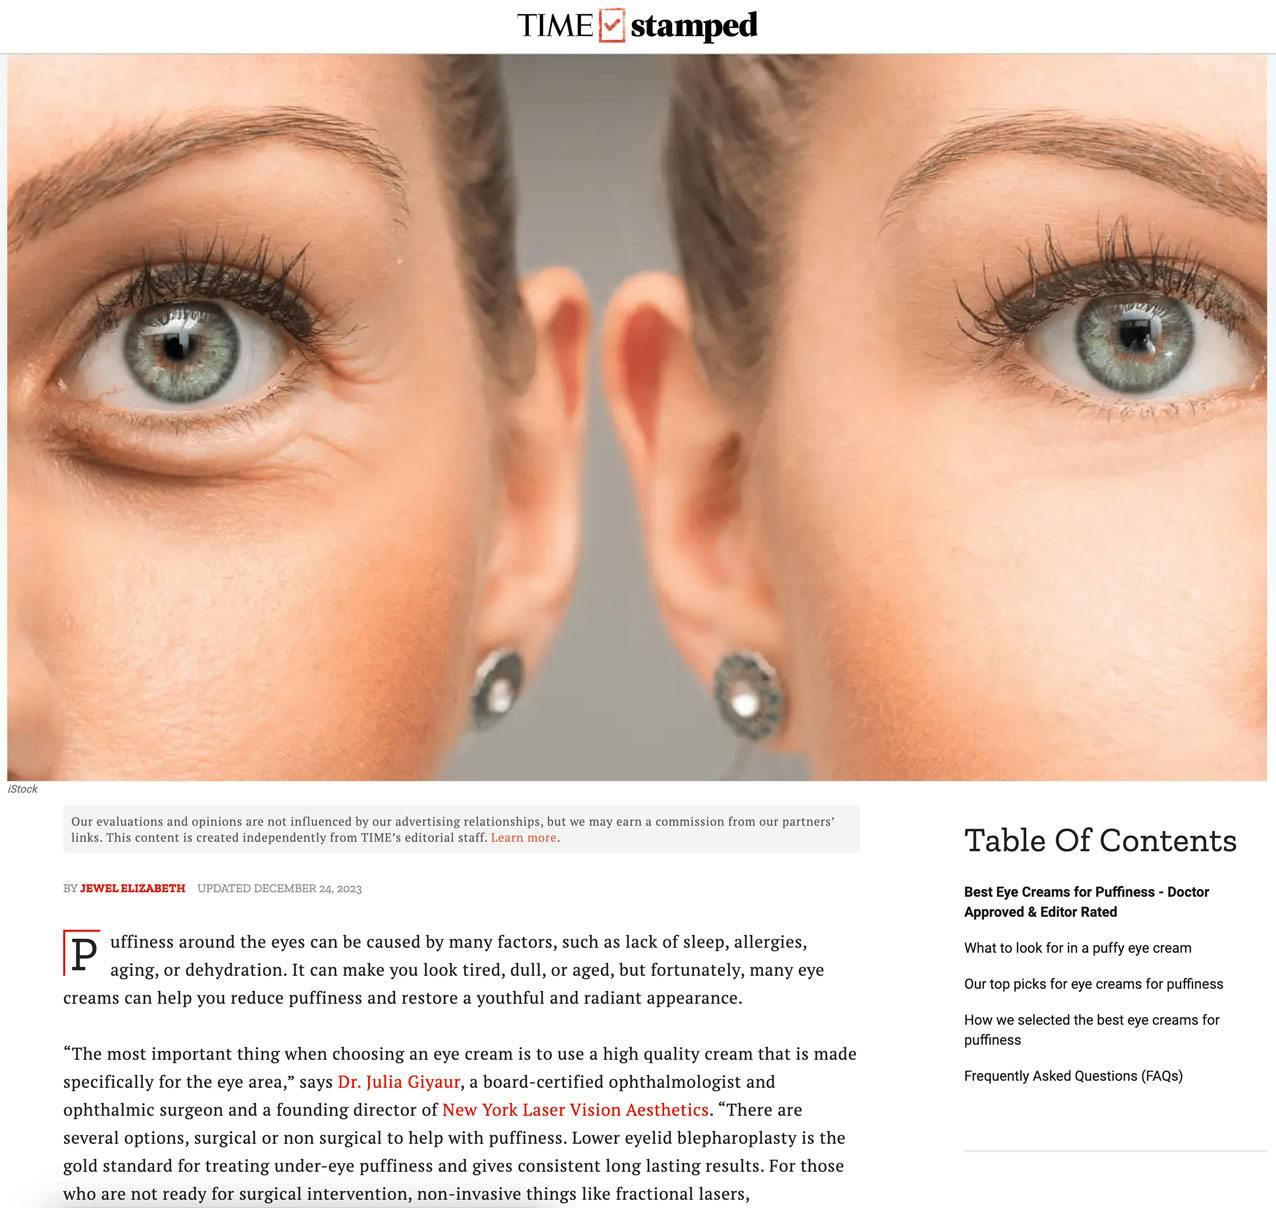 TIME.com featured Dr. Julia Giyaur's commentary and New York Laser Vision in their story, 'Best Eye Creams for Puffiness - Doctor Approved & Editor Rated.'